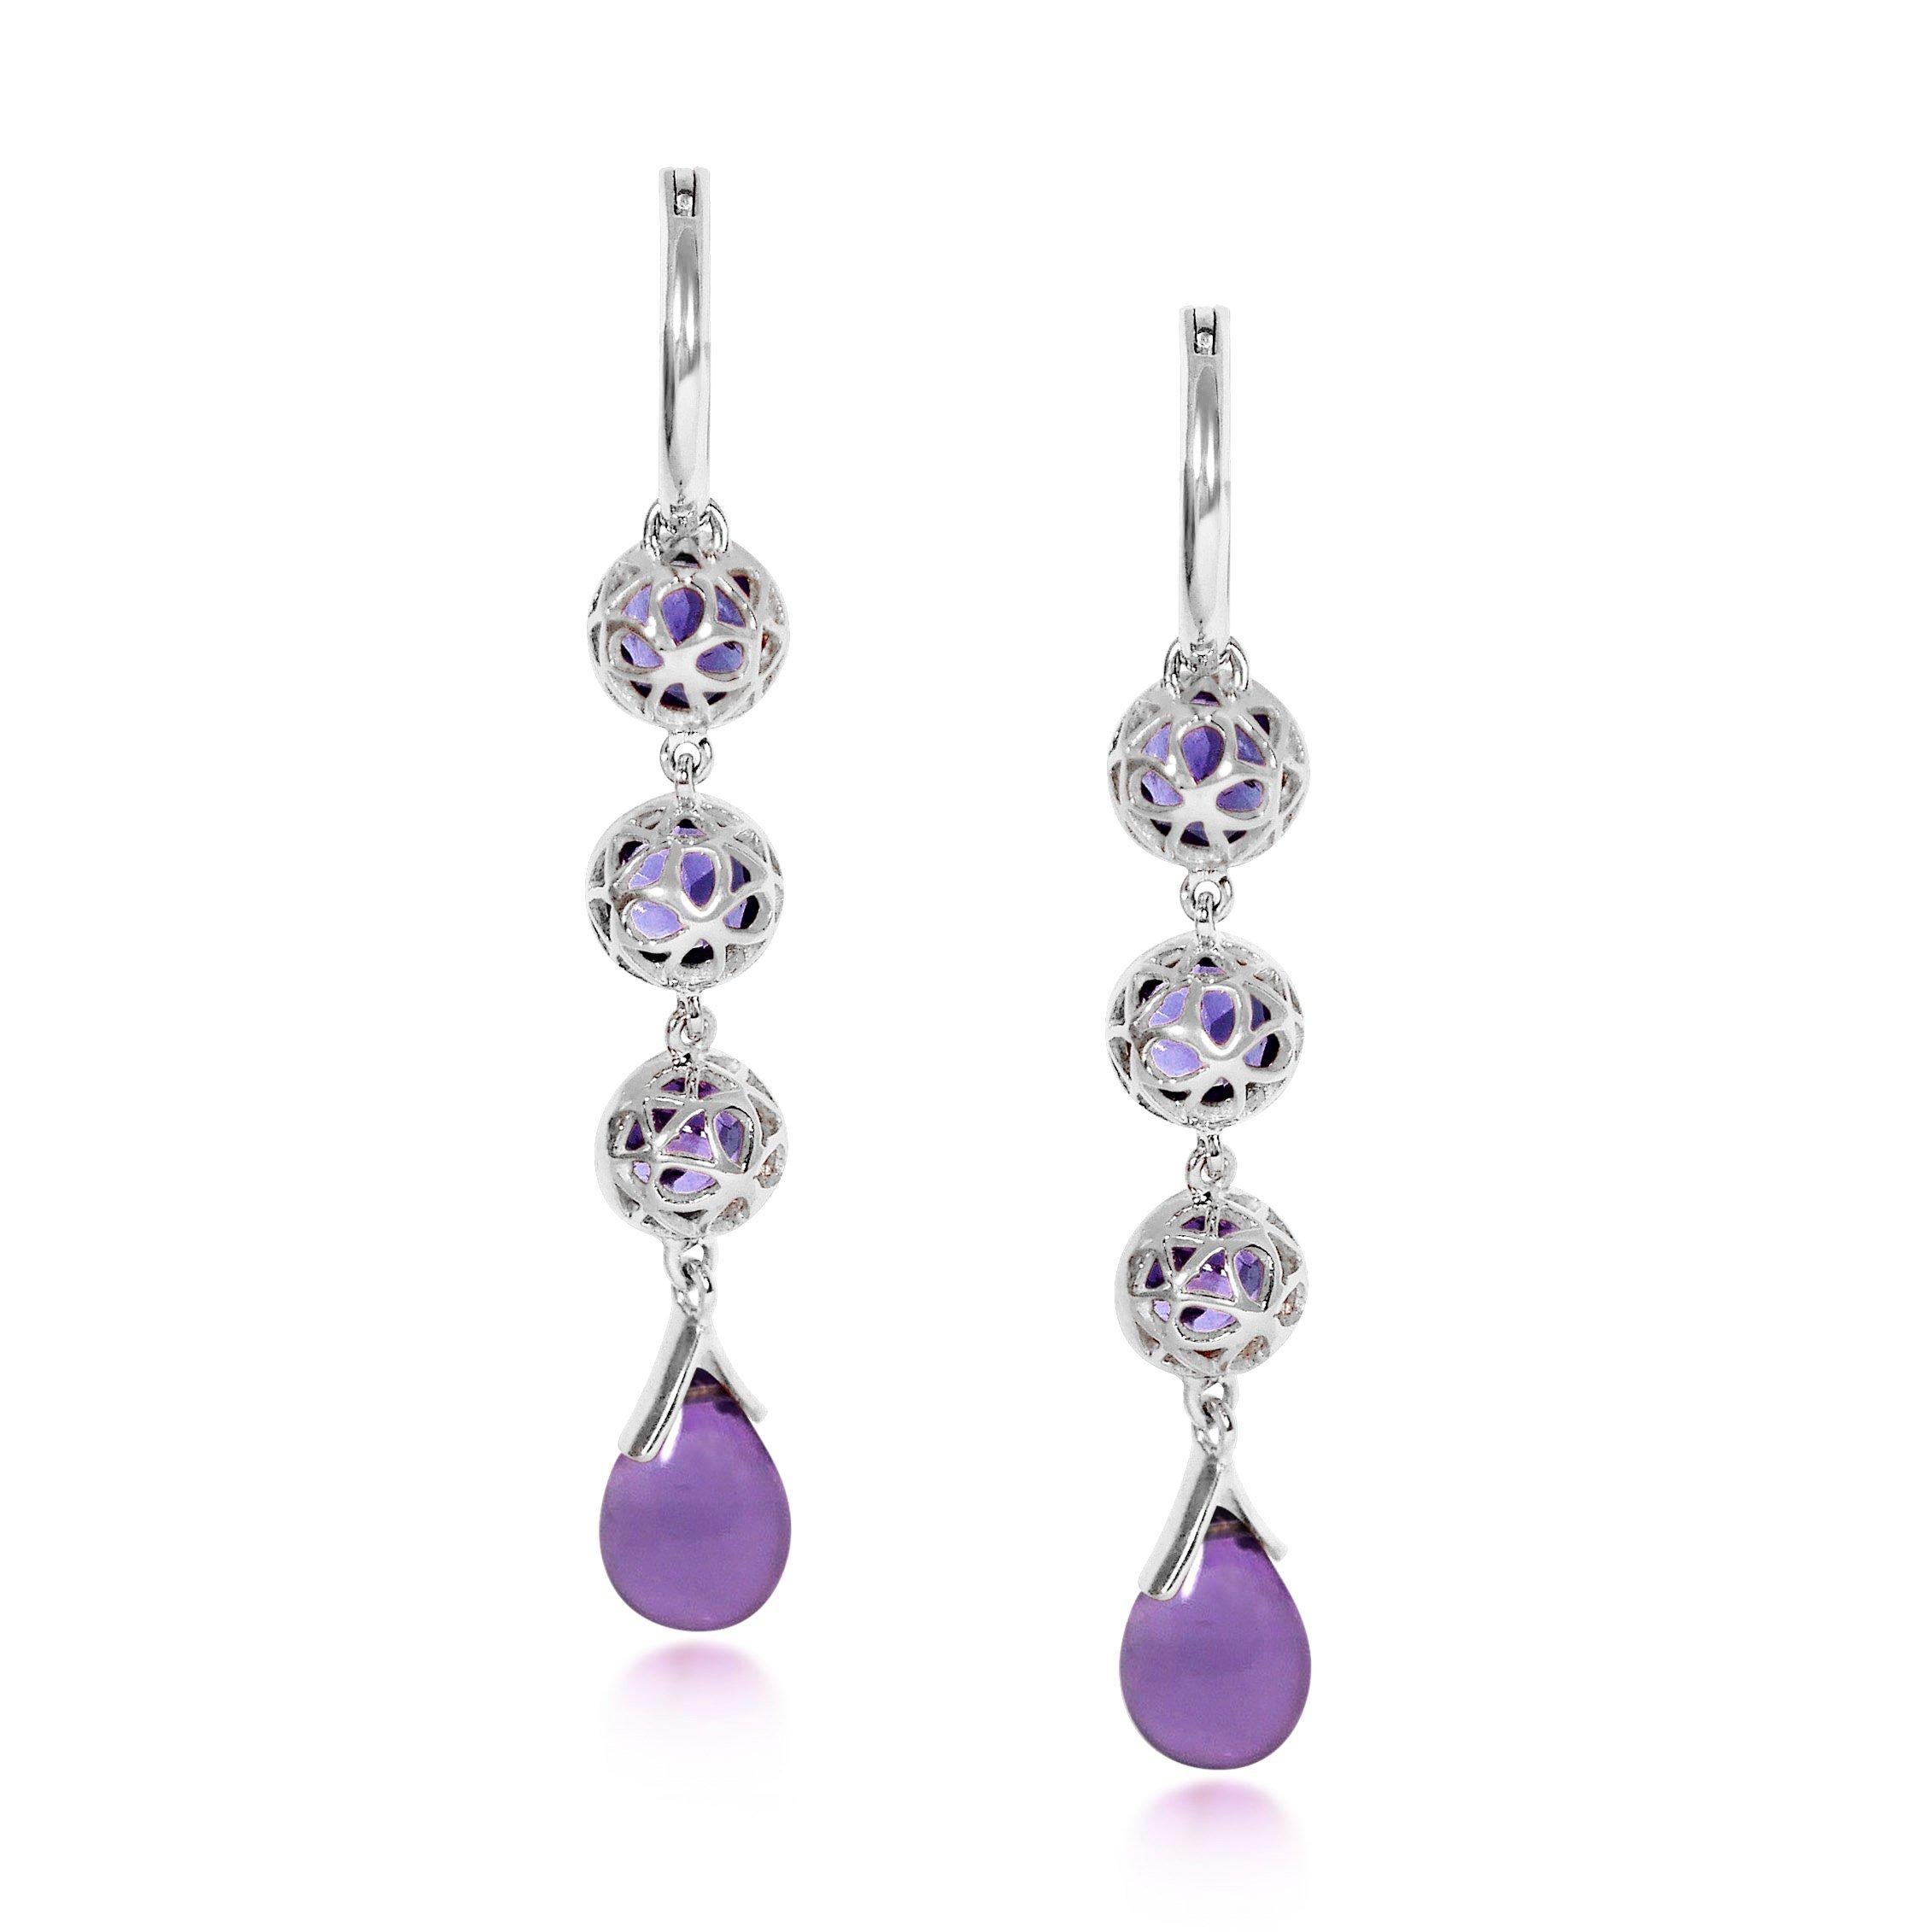 Brilliant Cut Handcrafted 1.50 Carats Amethysts 18 Karat White Gold Drop Earrings For Sale